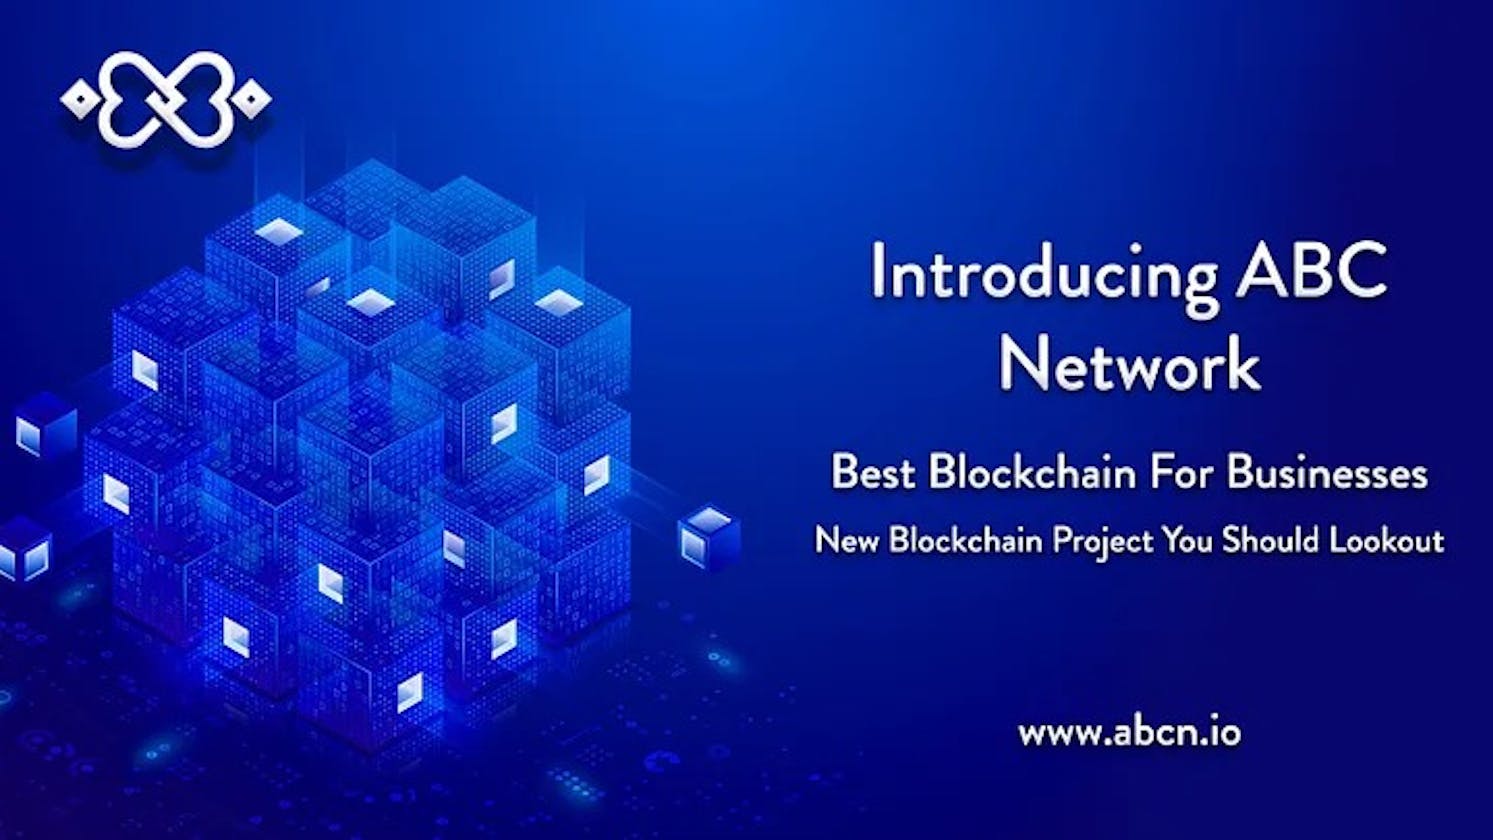 ABC Network- New Blockchain Project You Should Lookout!